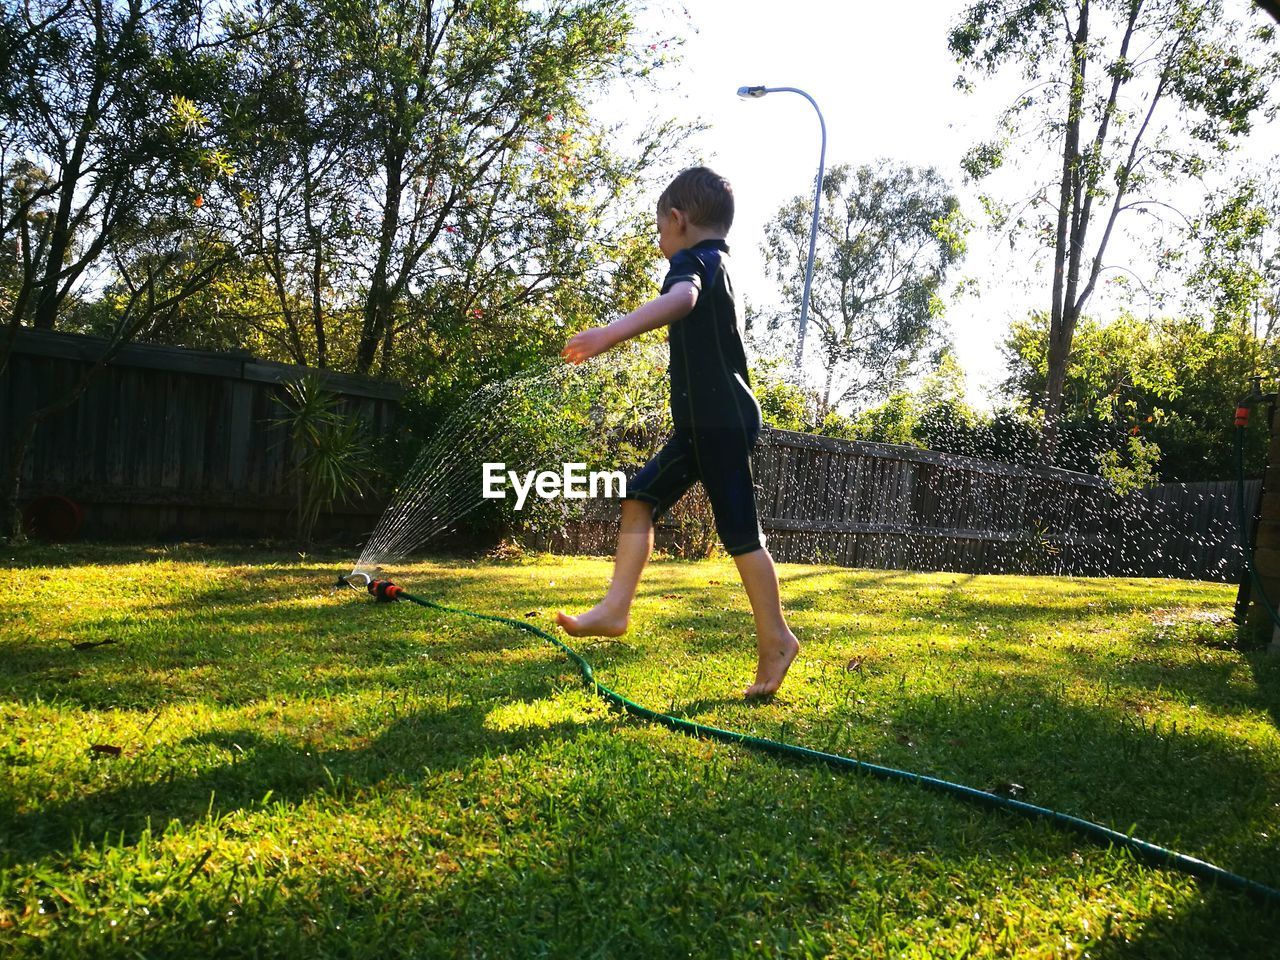 Boy playing with sprinkler in lawn